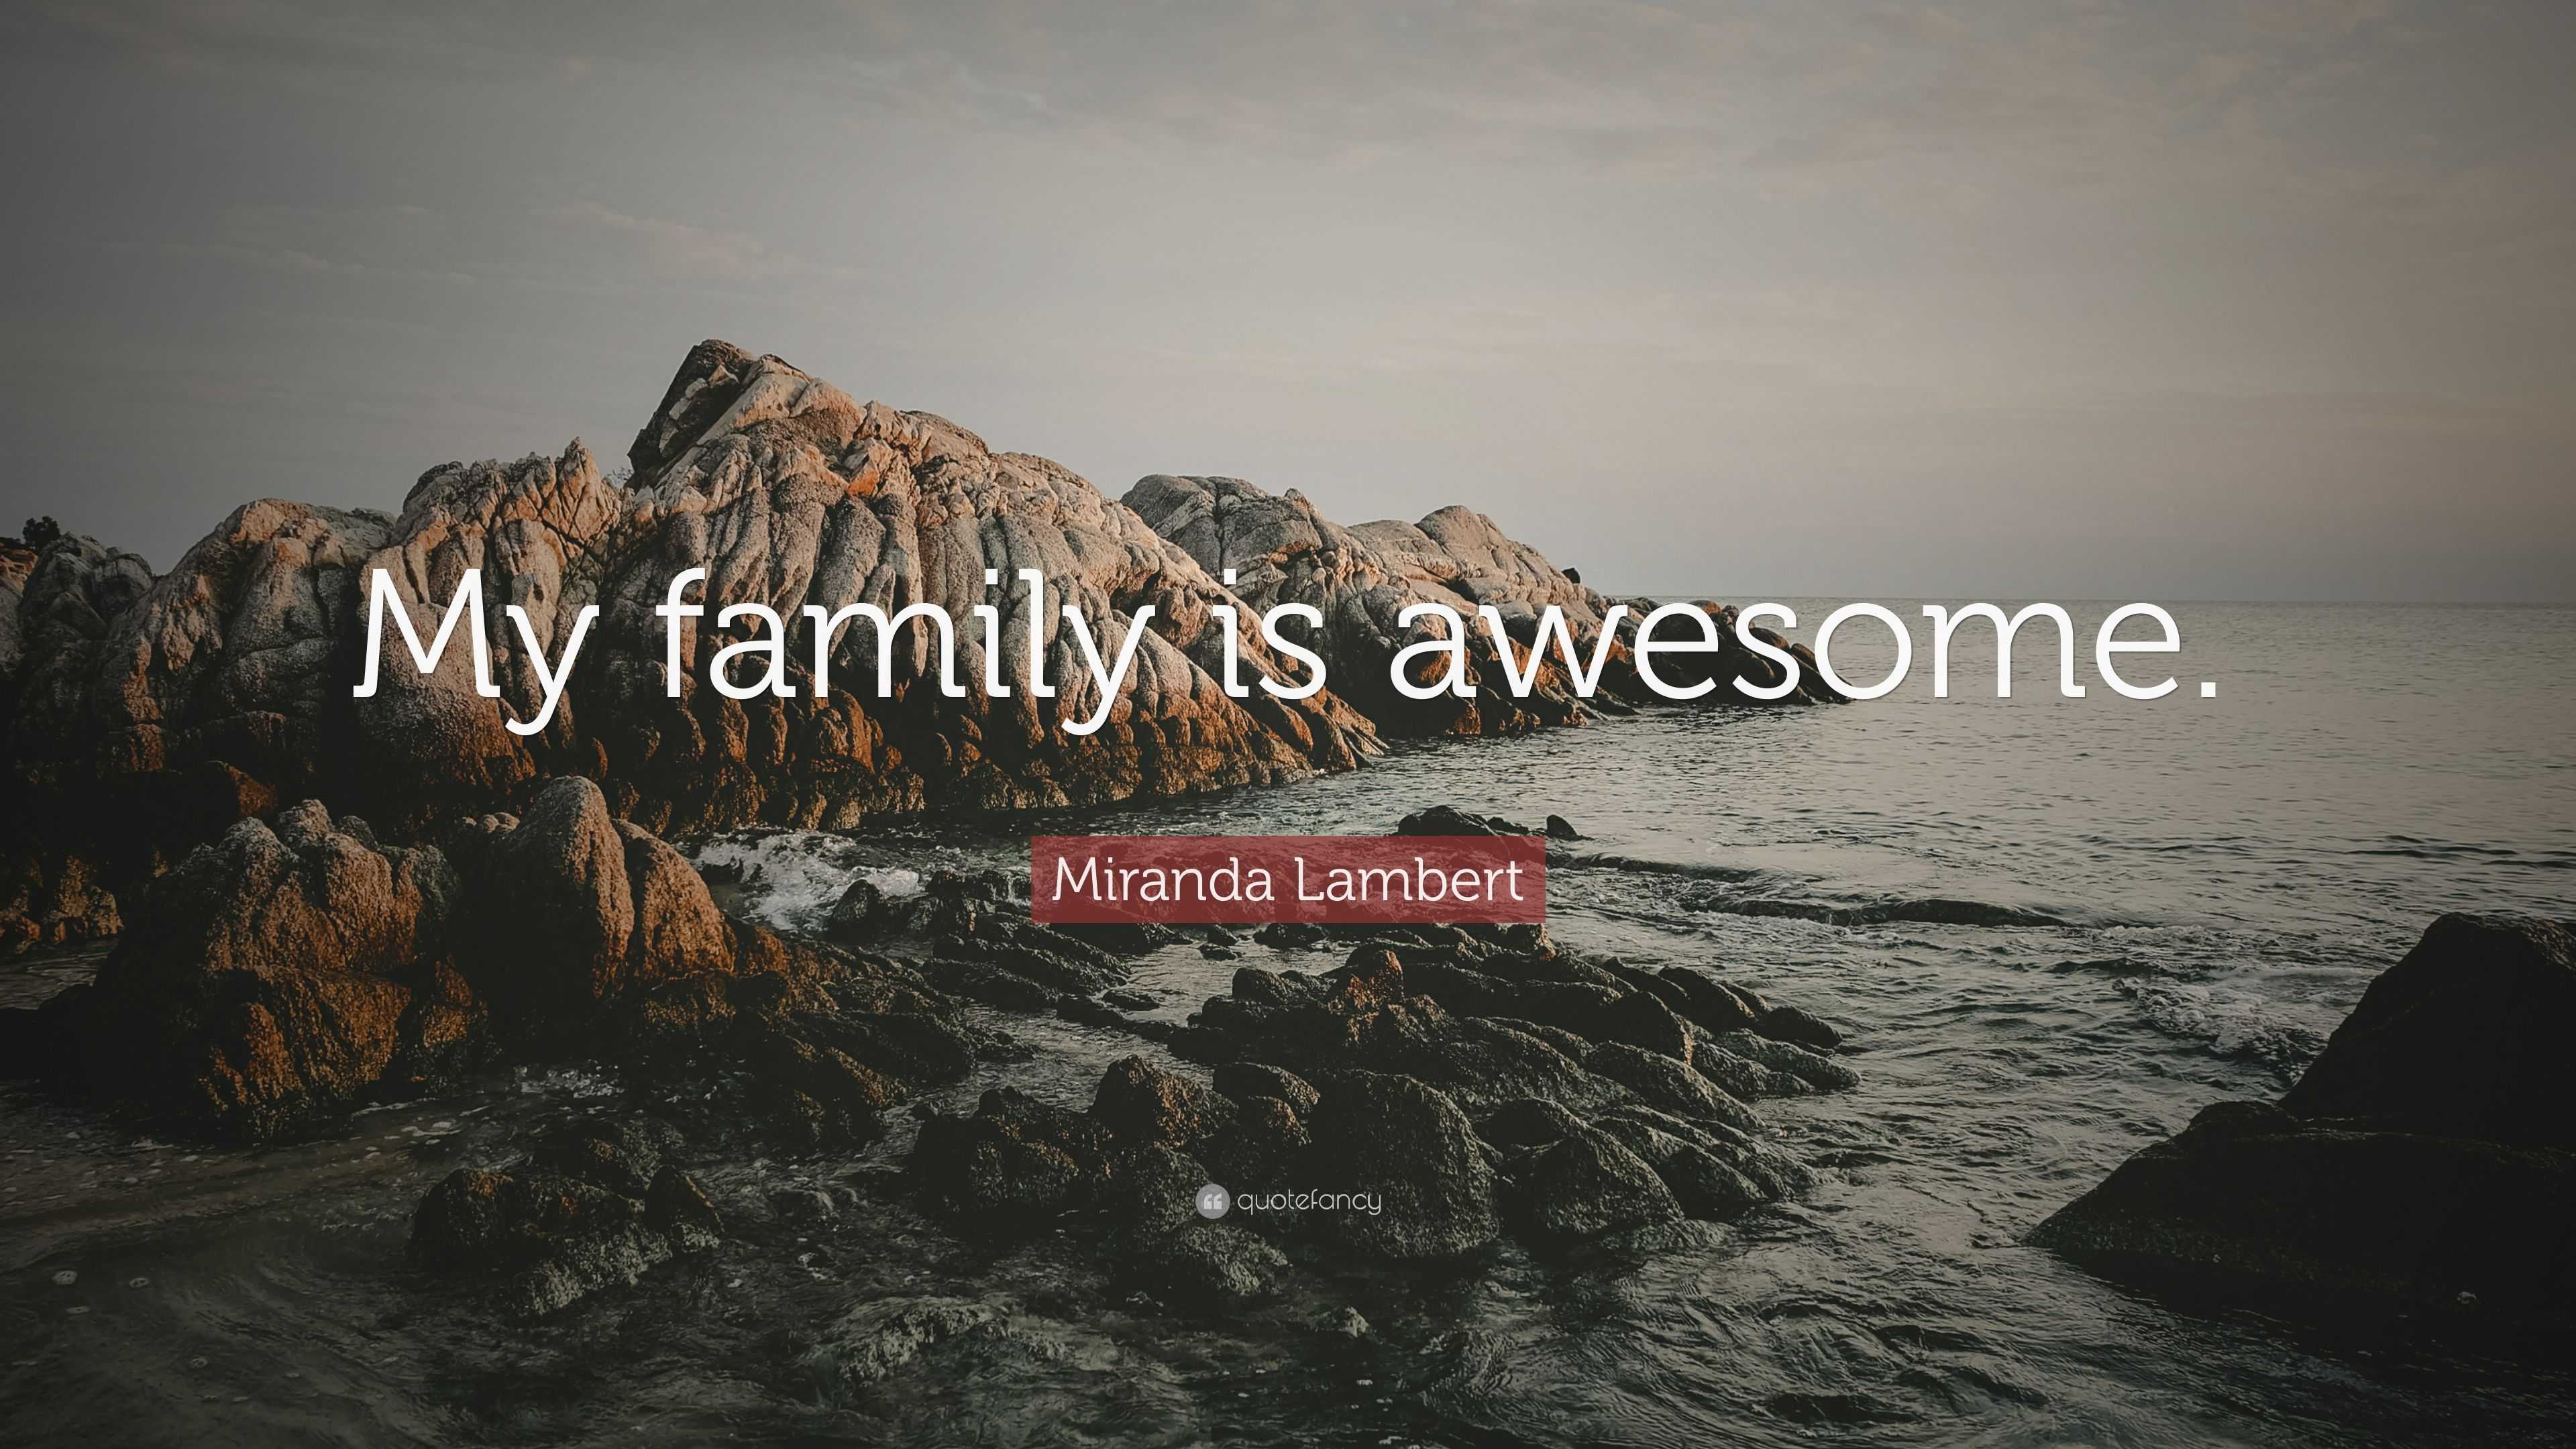 Miranda Lambert Quote My Family Is Awesome 12 Wallpapers Quotefancy